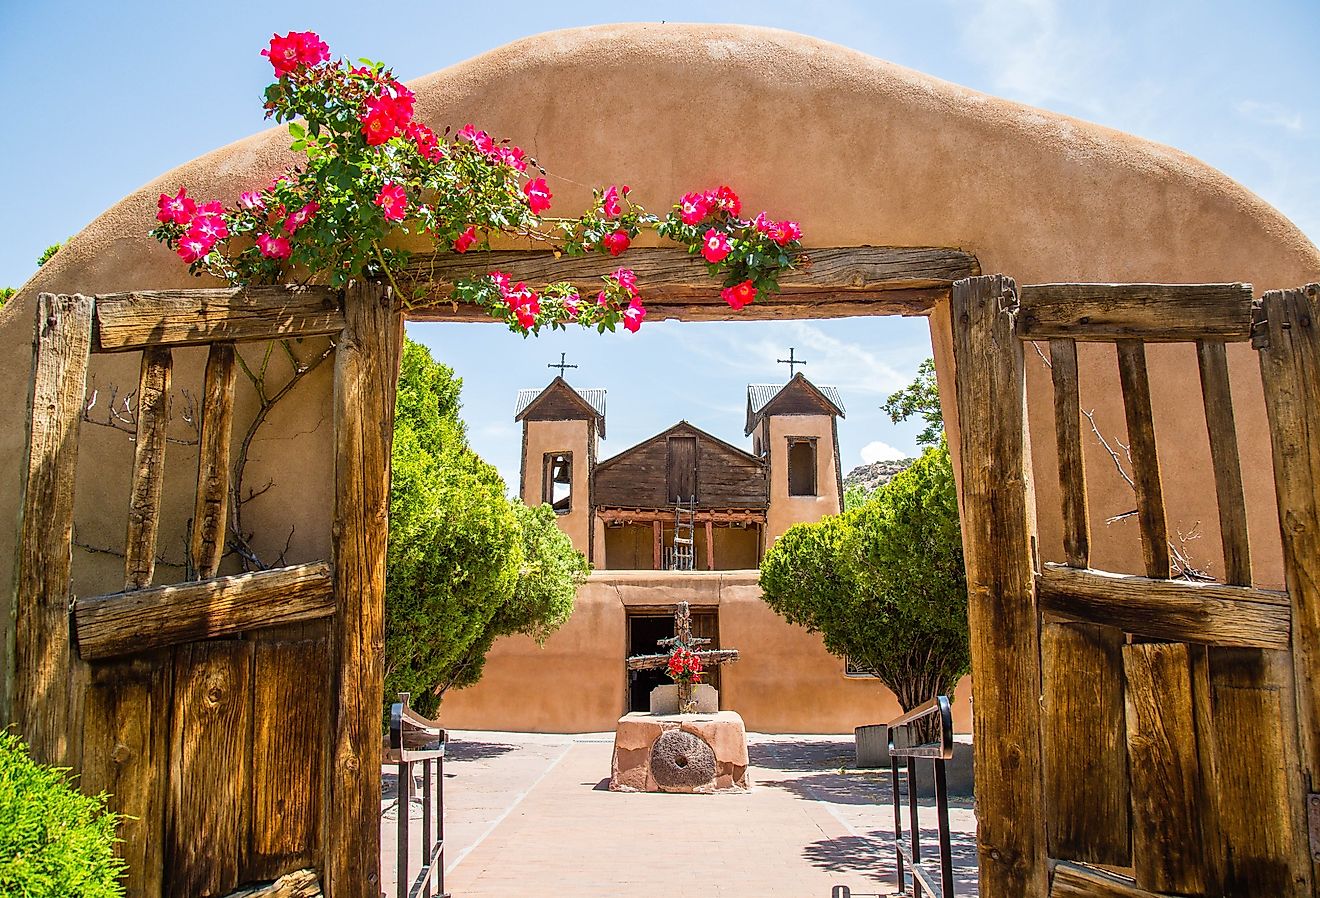 6 Underappreciated Towns to Visit in New Mexico